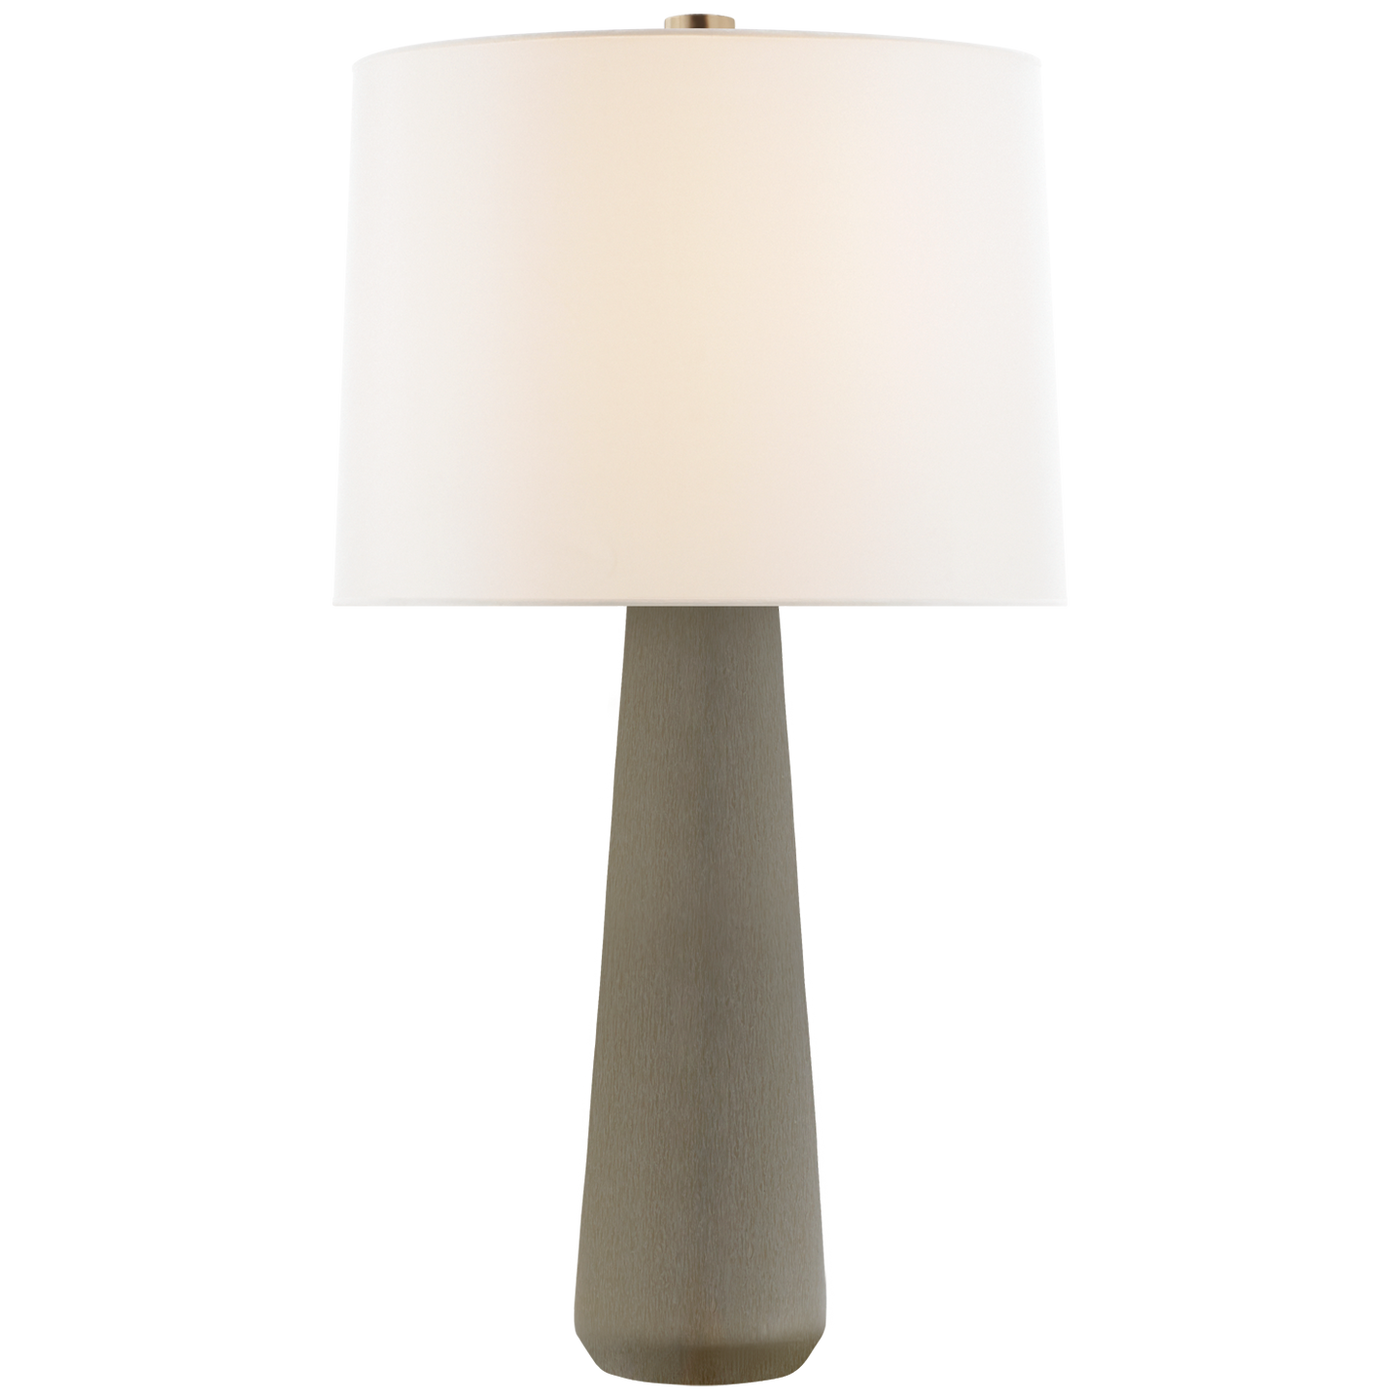 TABLE LAMP CERAMIC GLAZE LARGE (Available in 2 Finishes)